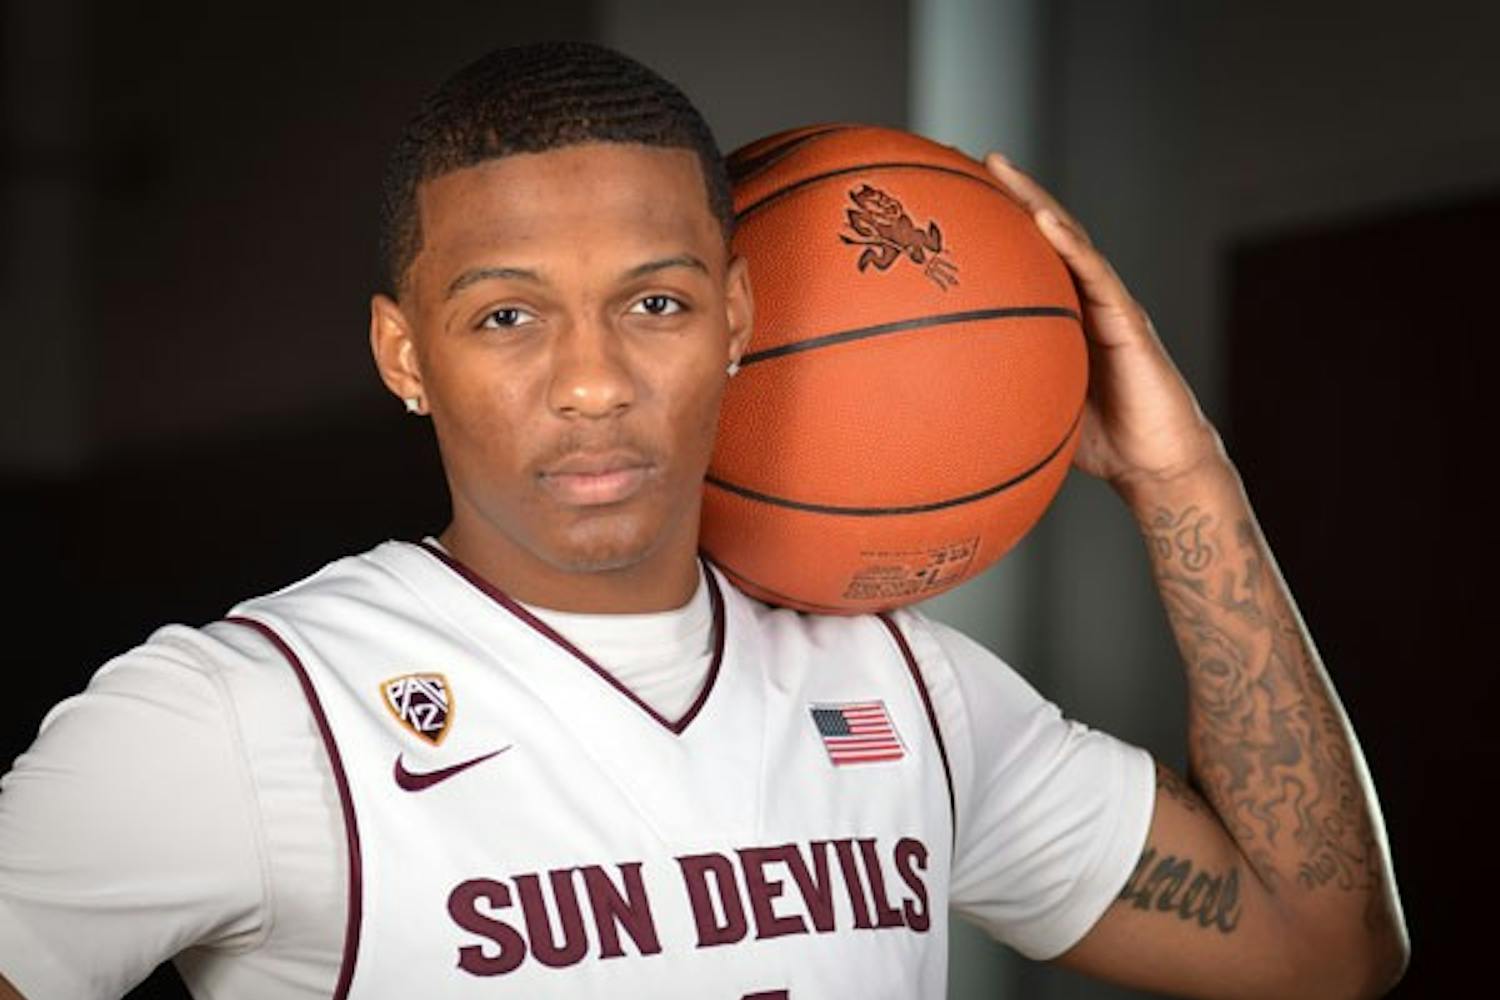 Redshirt freshman guard Jahii Carson is scheduled to make his ASU debut in the Sun Devils’ season opener against Central Arkansas on Saturday. (Photo by Aaron Lavinsky)